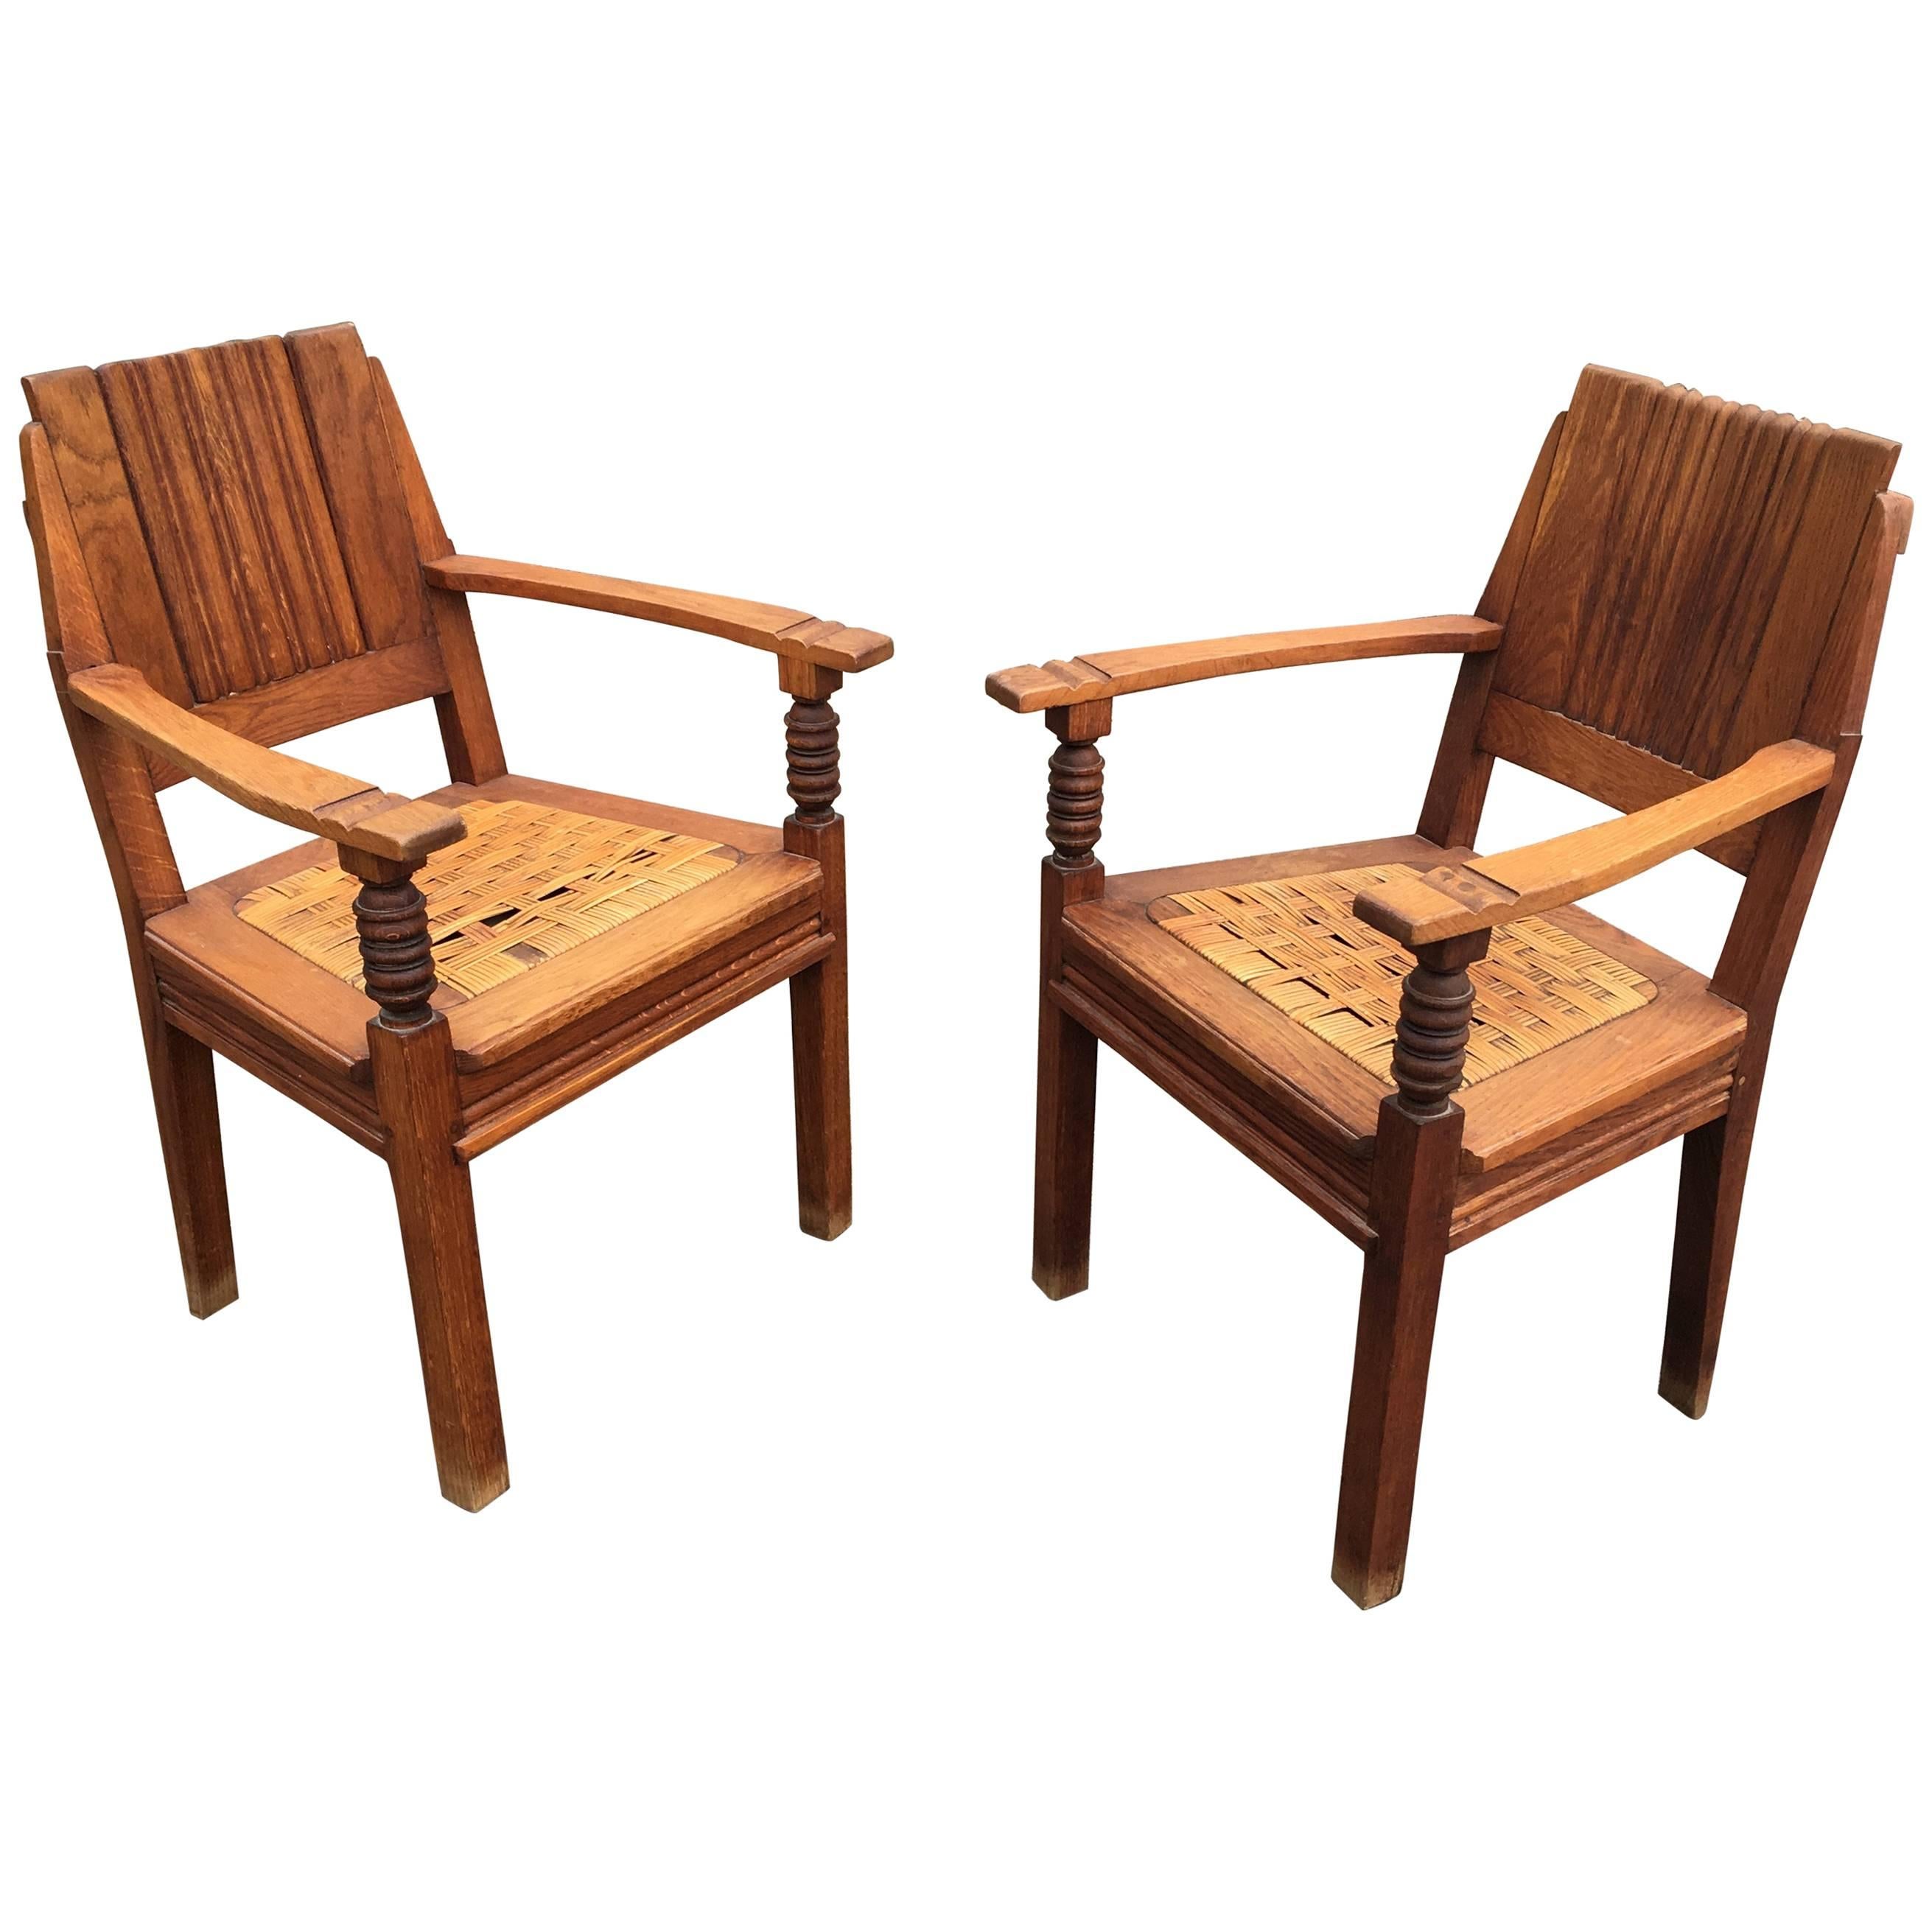 Charles Dudouyt, two Armchairs in Solid Oak and Wicker circa 1940